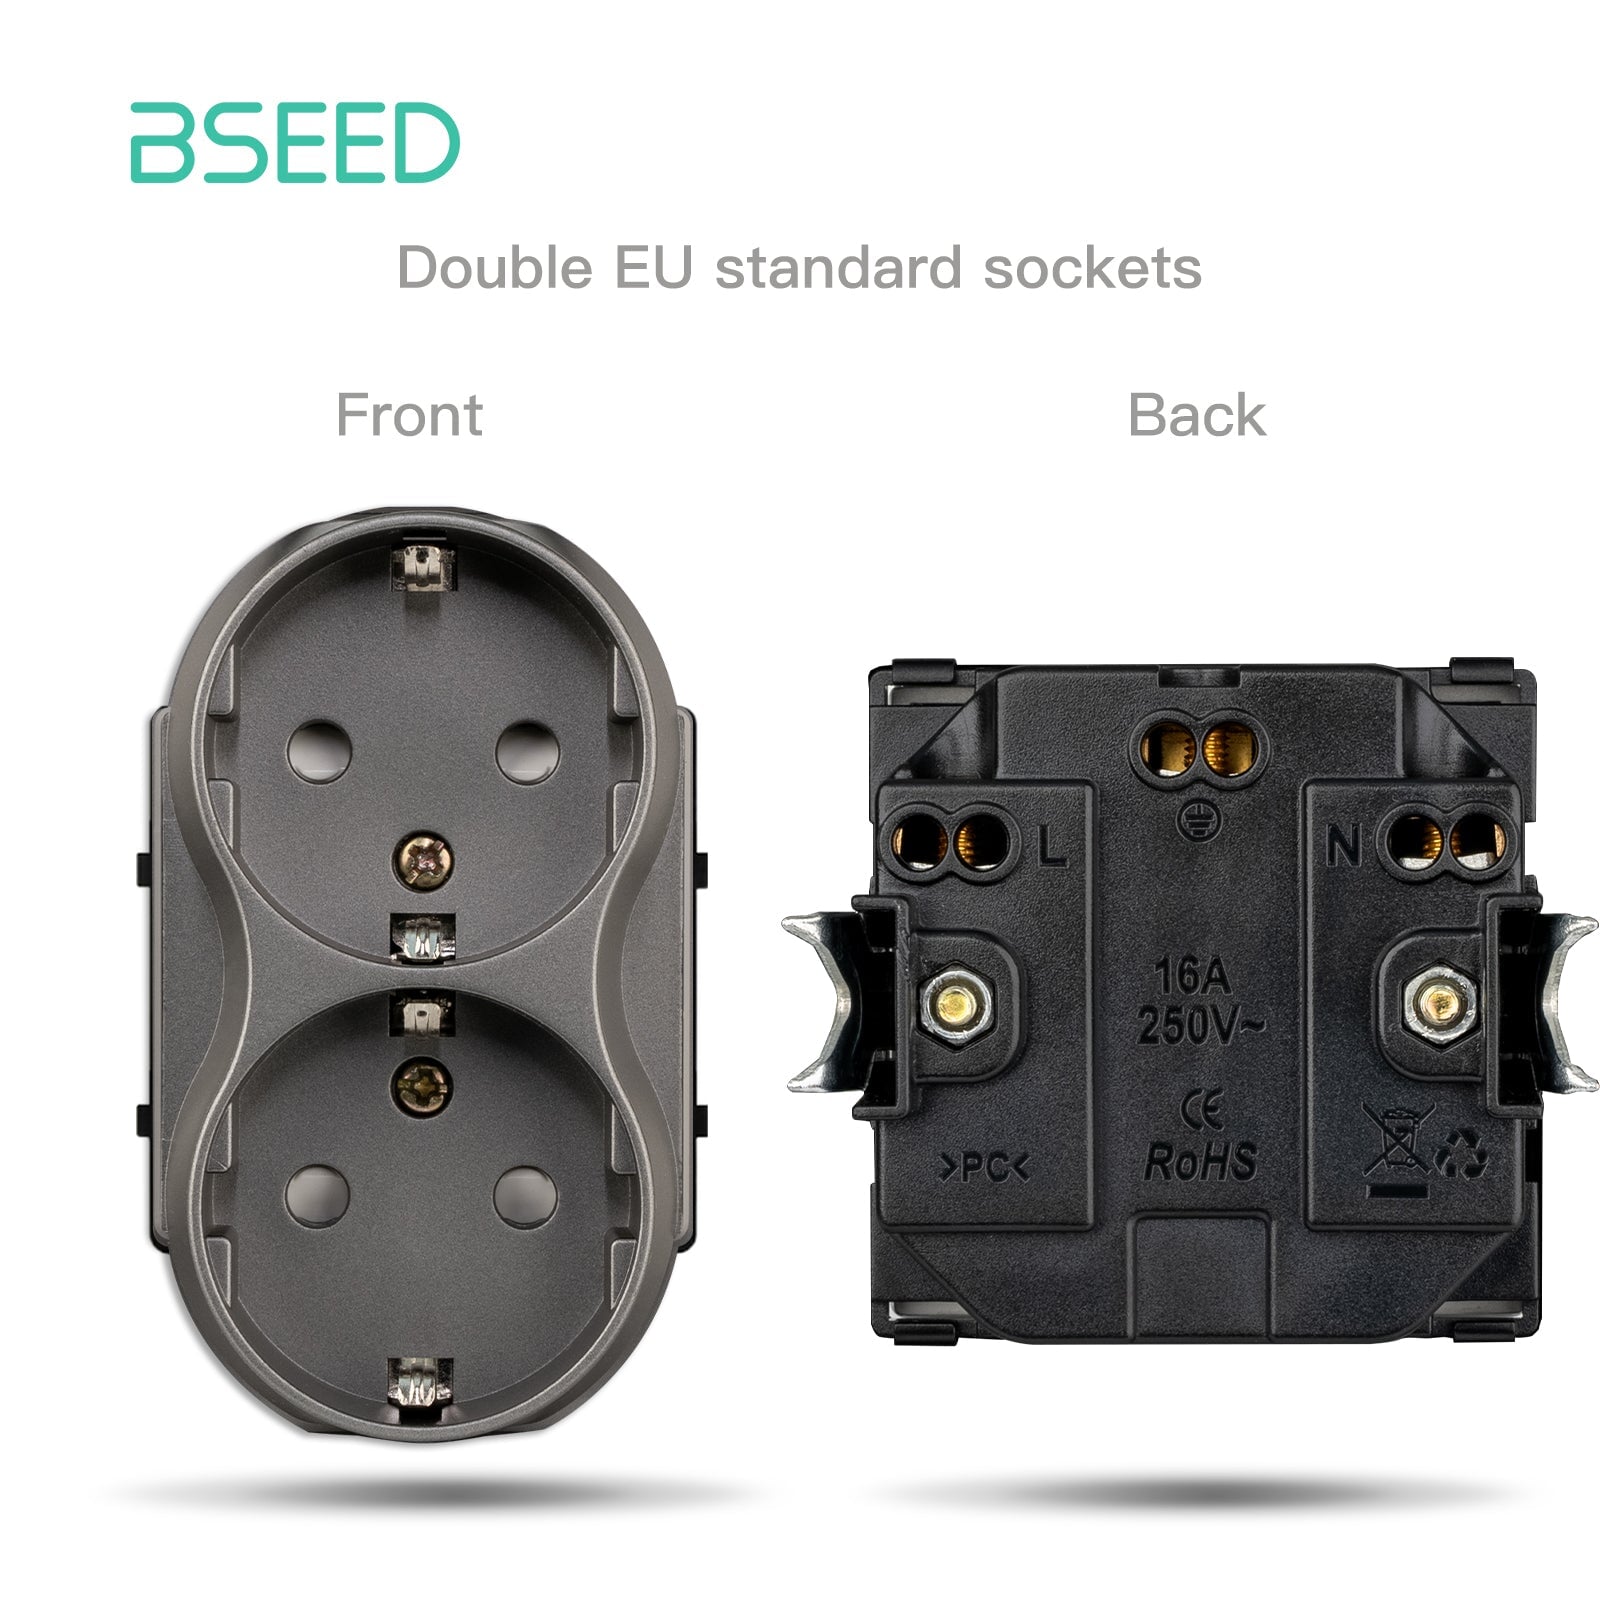 BSEED EU/FR Standard double Wall Socket Function Key without panel DIY part Power Outlets & Sockets Bseedswitch Grey EU 